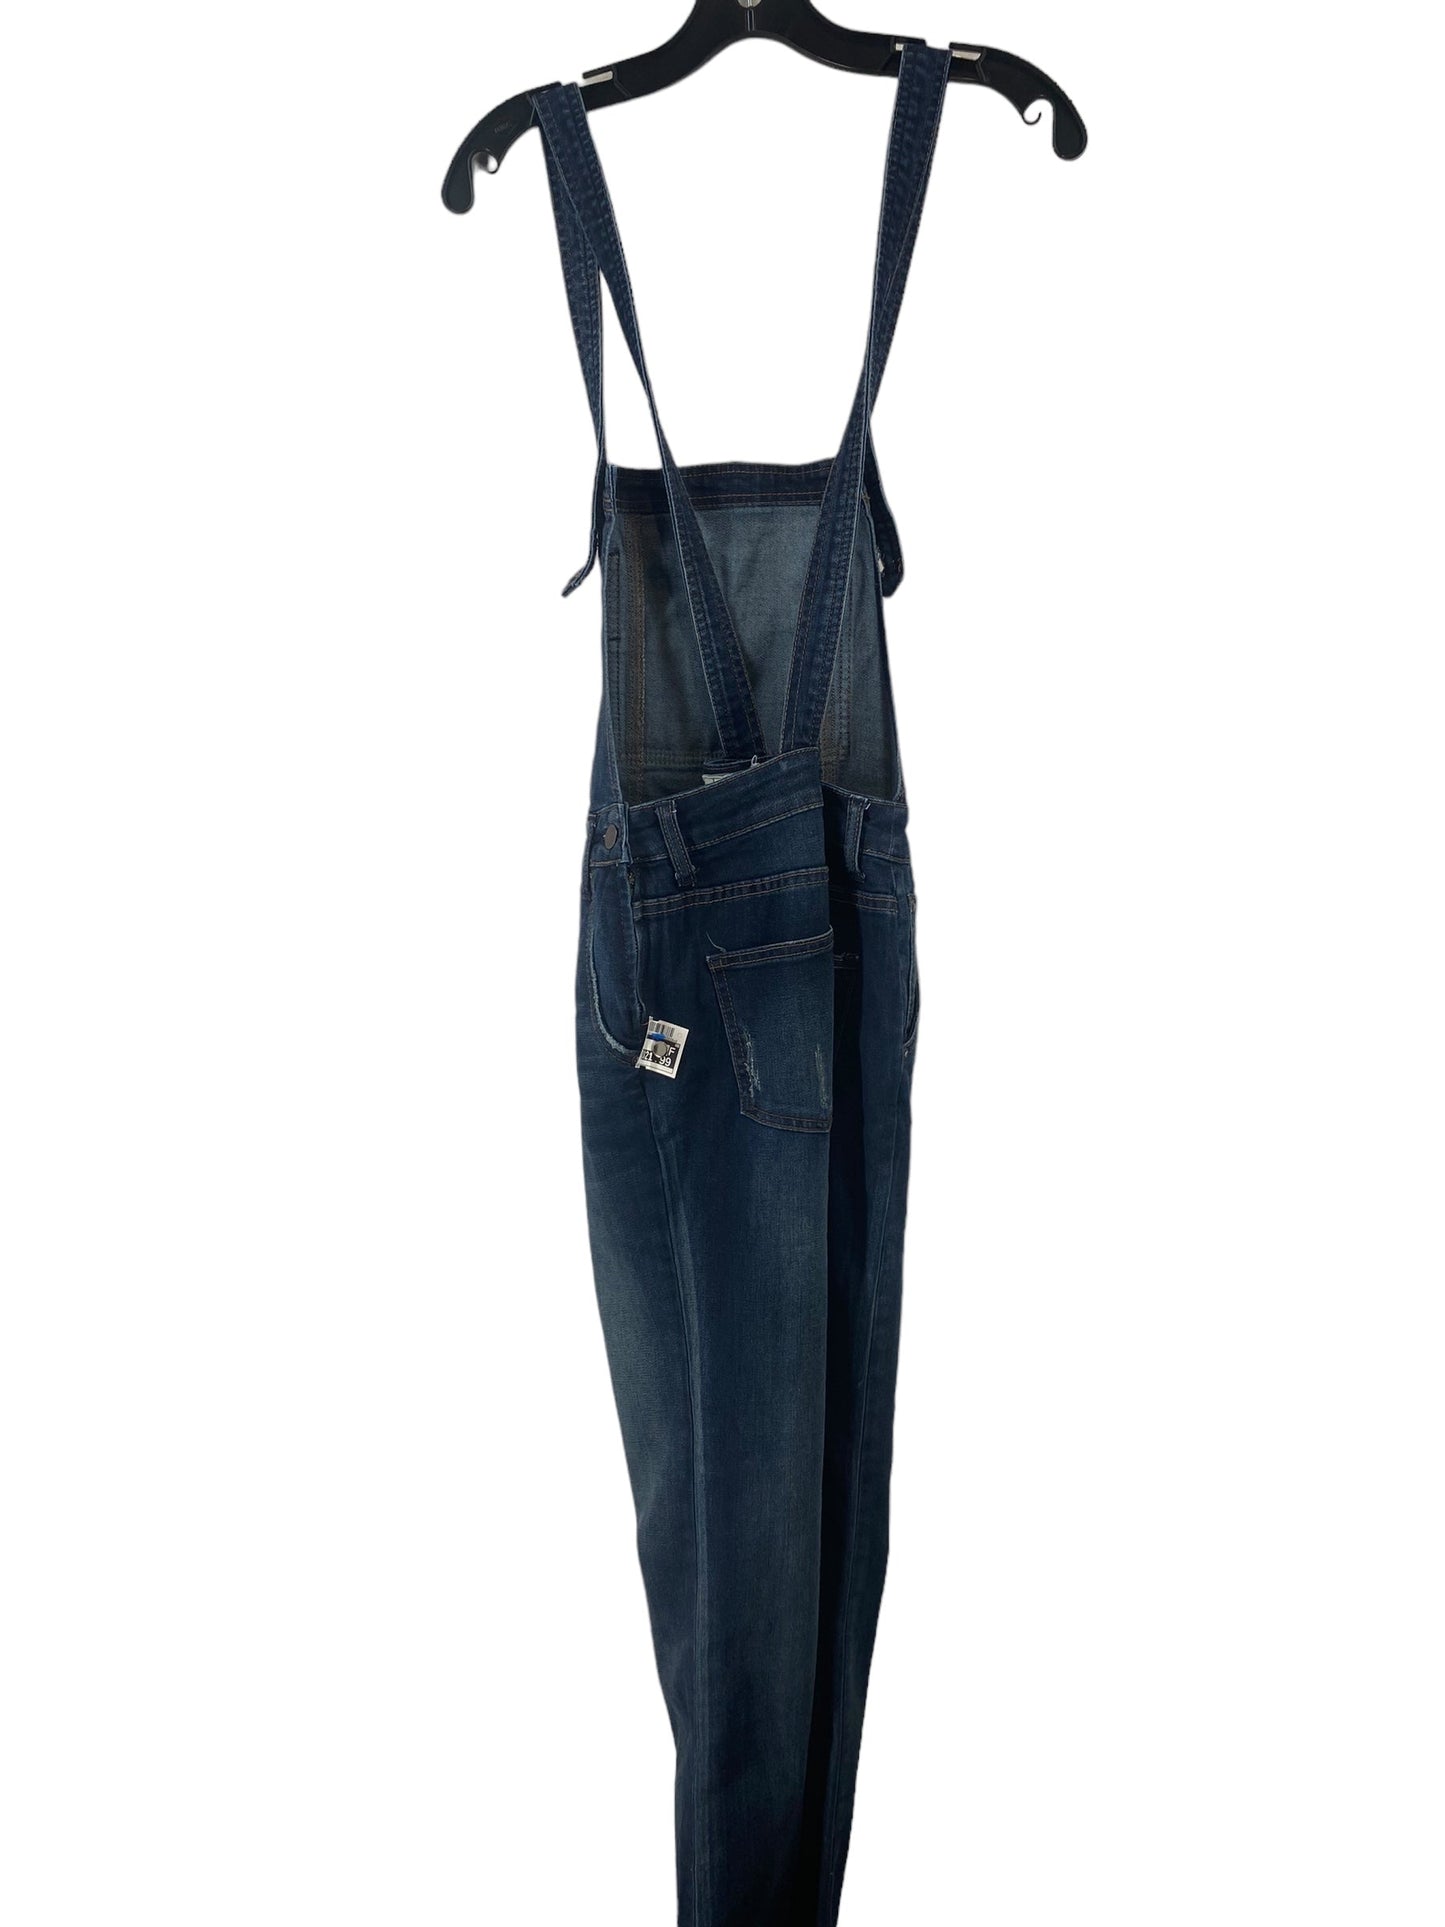 Blue Denim Overalls Free People, Size 26